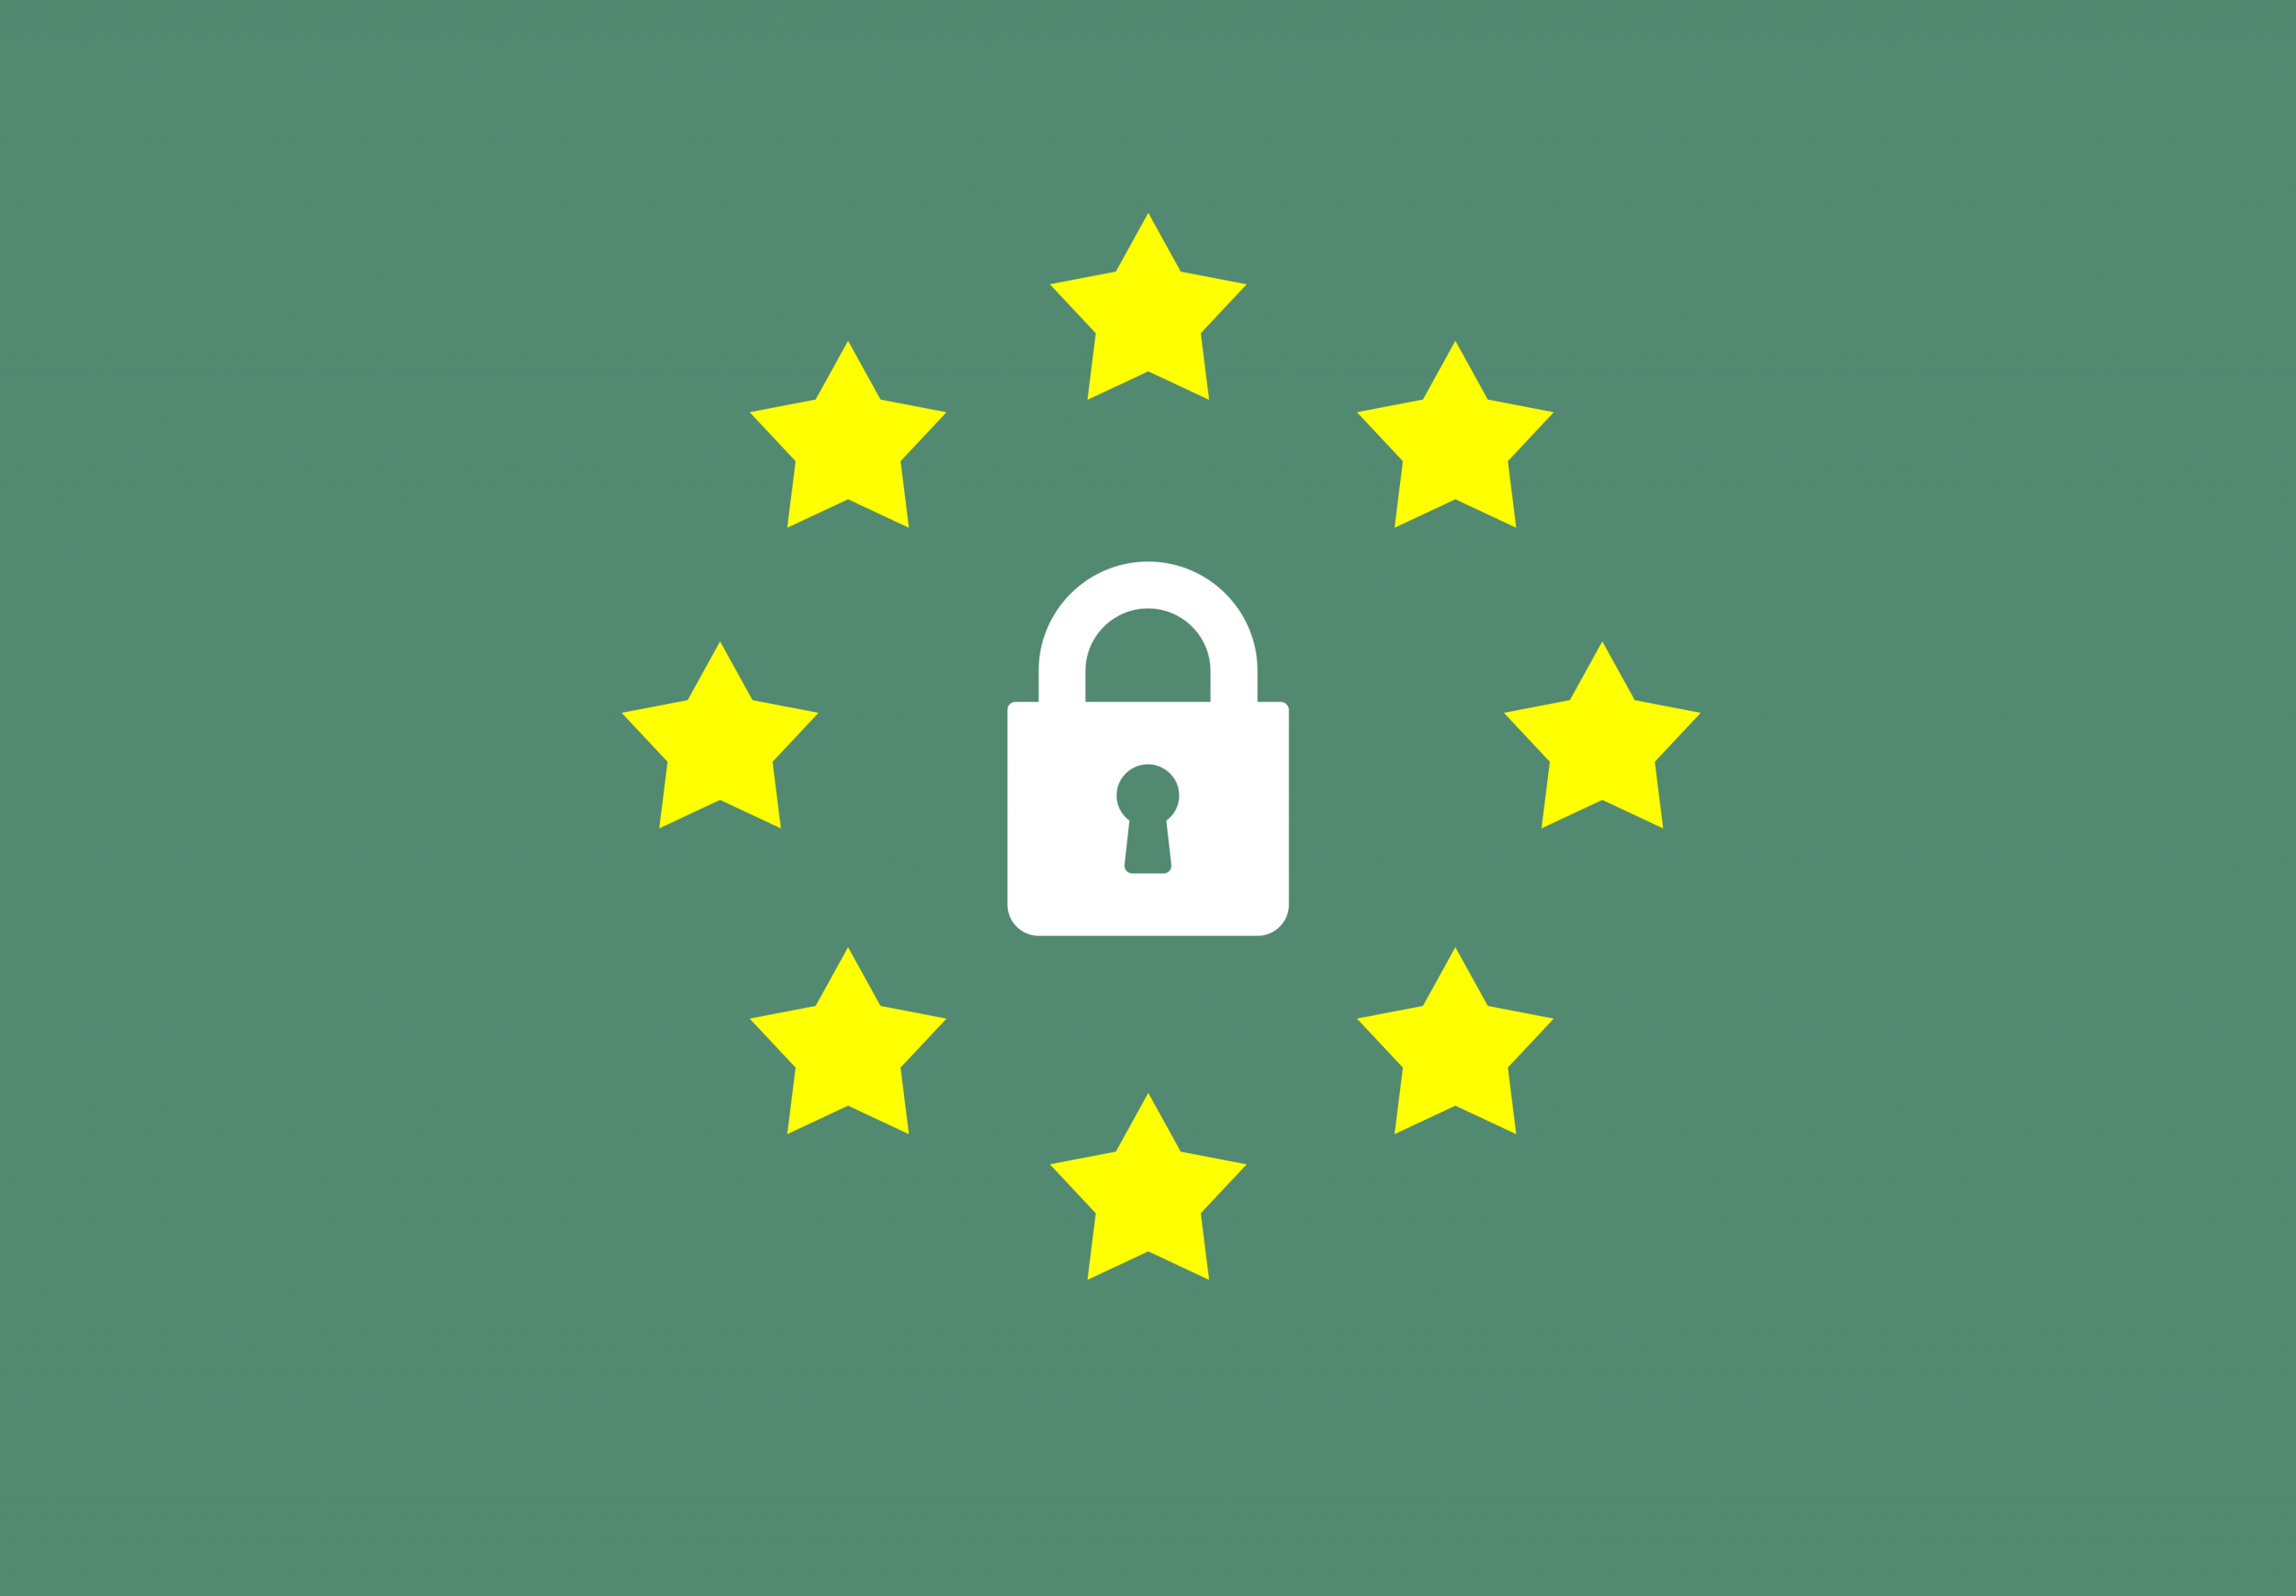 GDPR Logo and the EU stars on green background